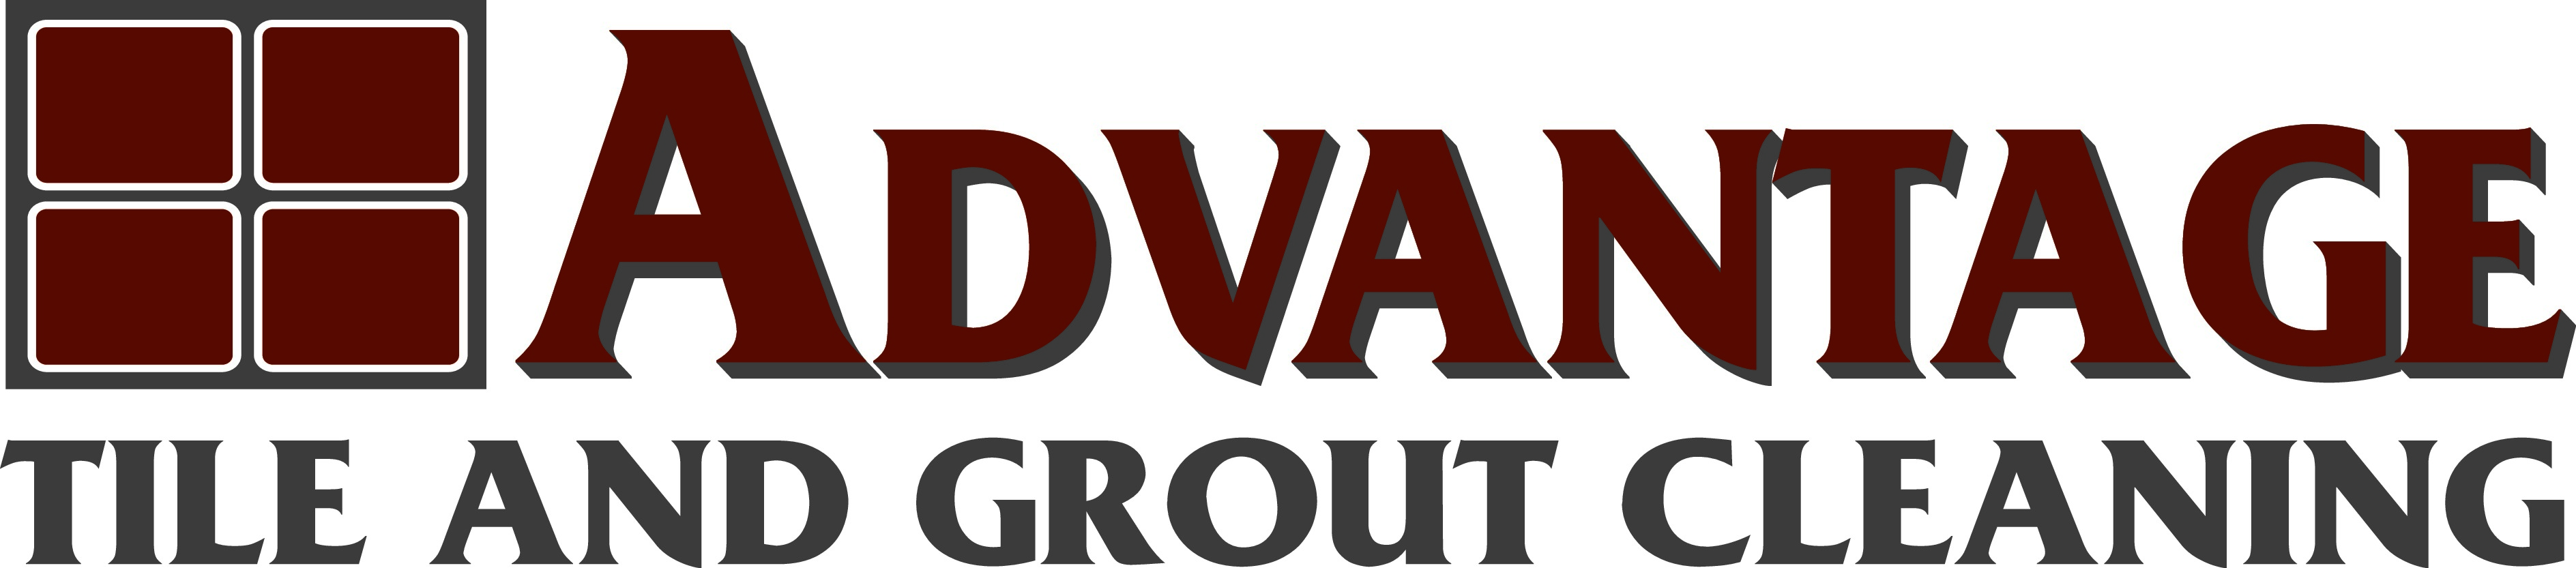 Advantage Tile and Grout Cleaning Logo